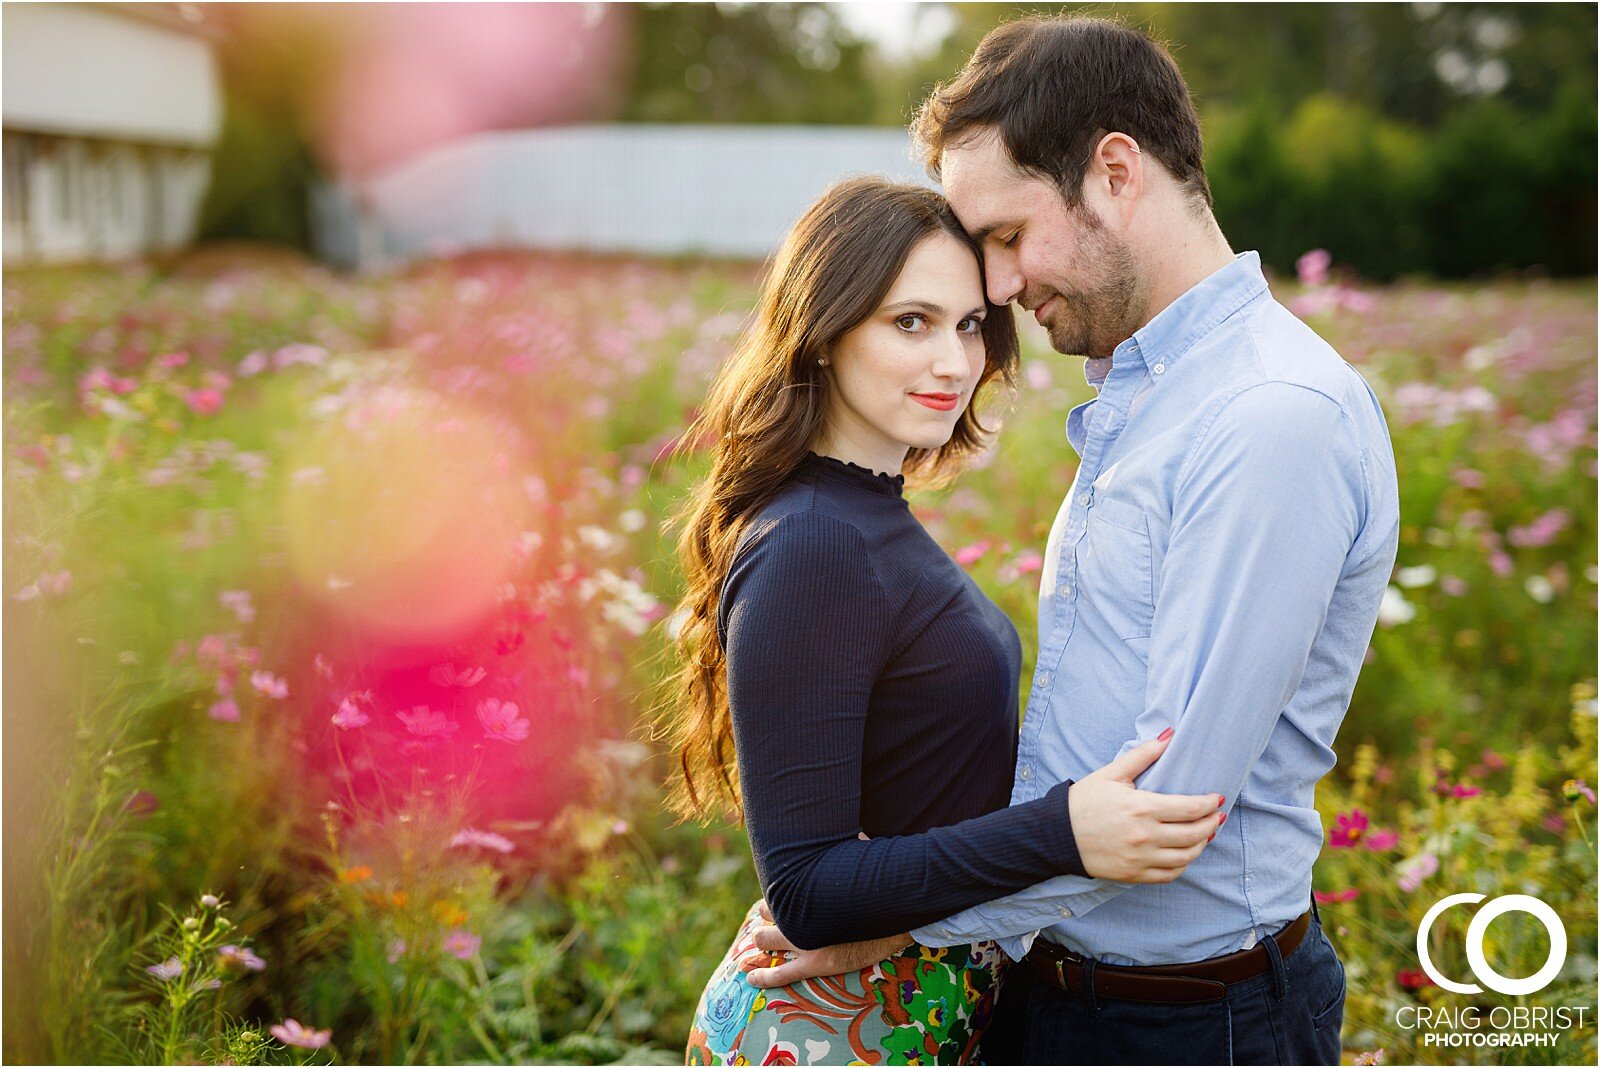 The Barn at Little River Little River Farms Engagement Wedding Portraits Fairy Tale_0017.jpg